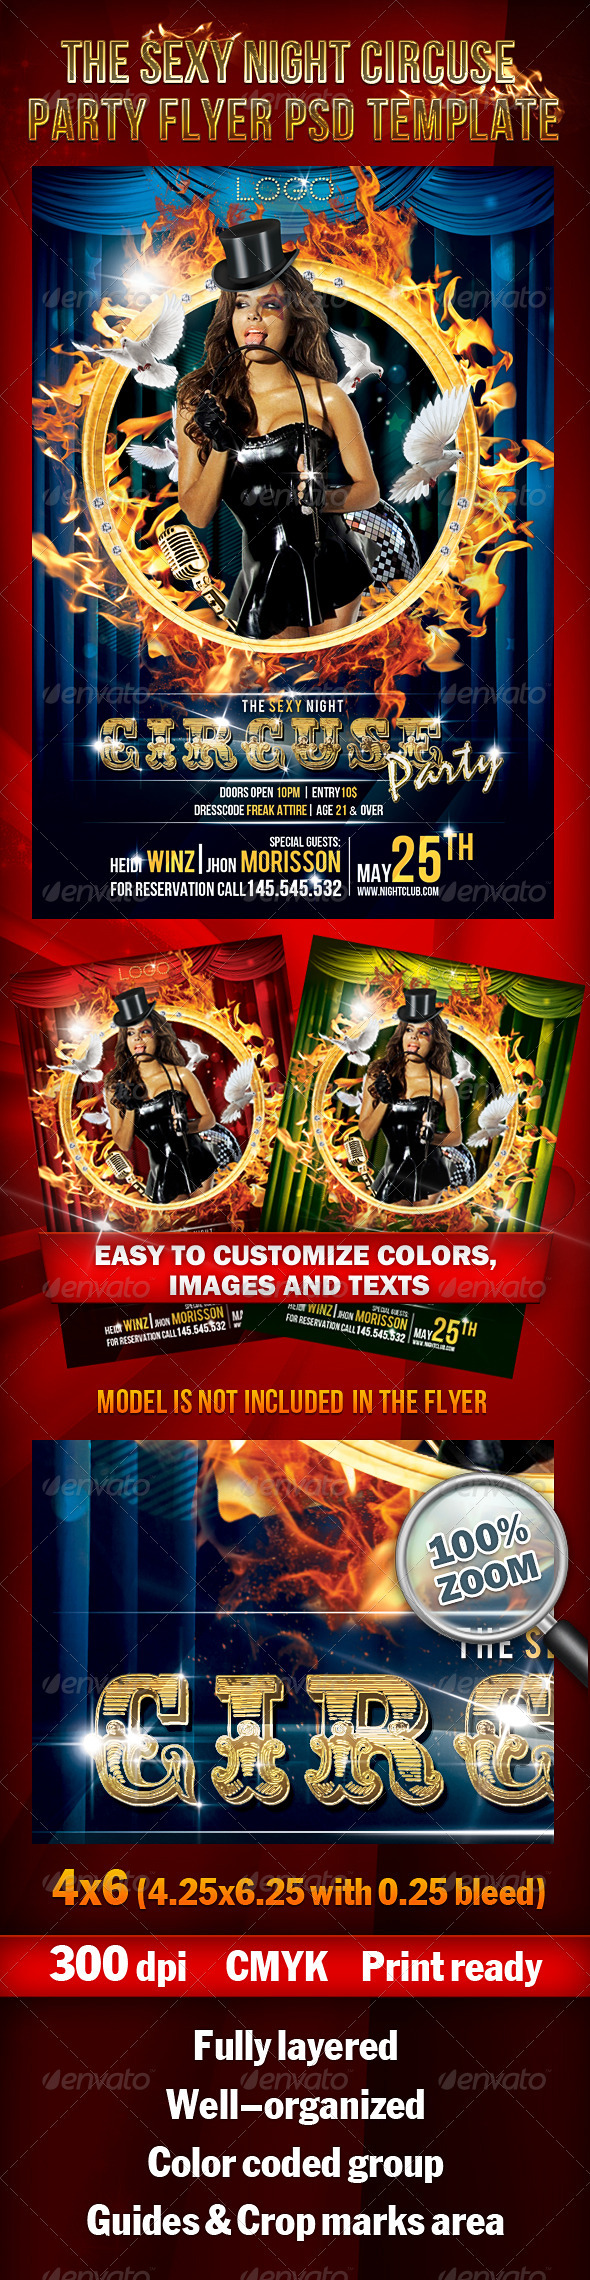 The Sexy Night Circuse Party Flyer PSD Template